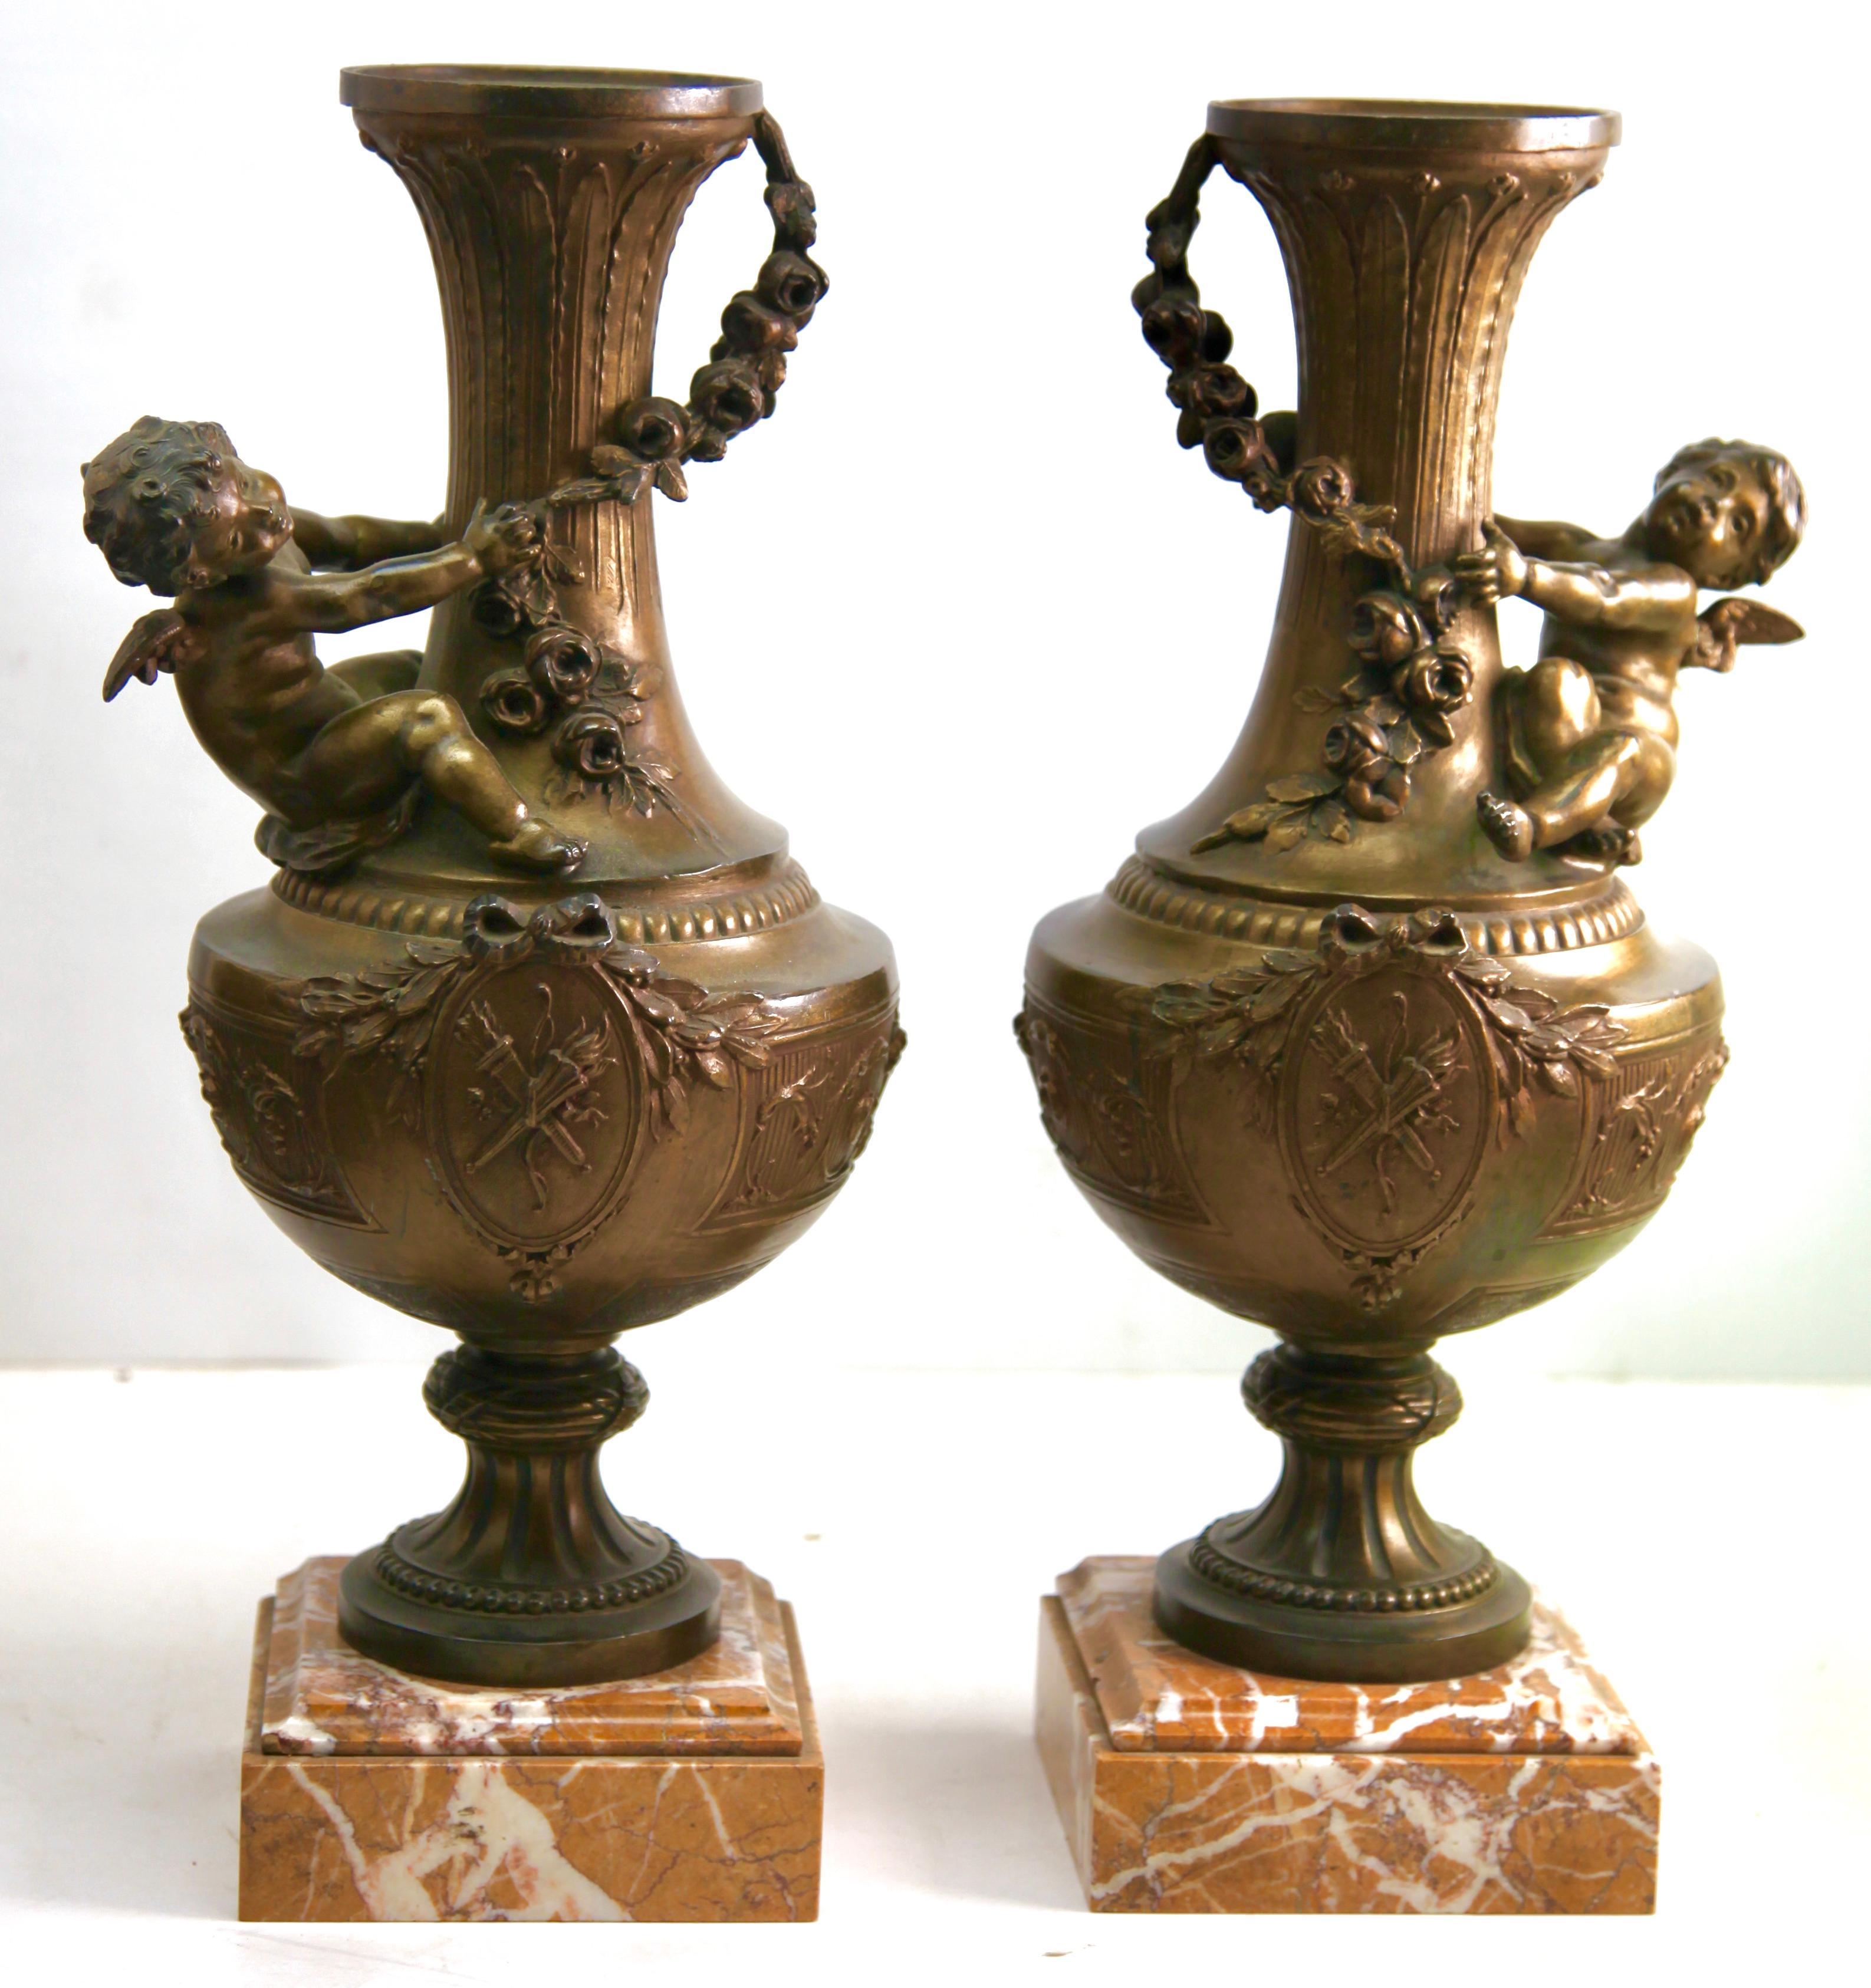 Cast Pair of Ornamented Vases or Lamps with Little Angels and Richly Decorated For Sale